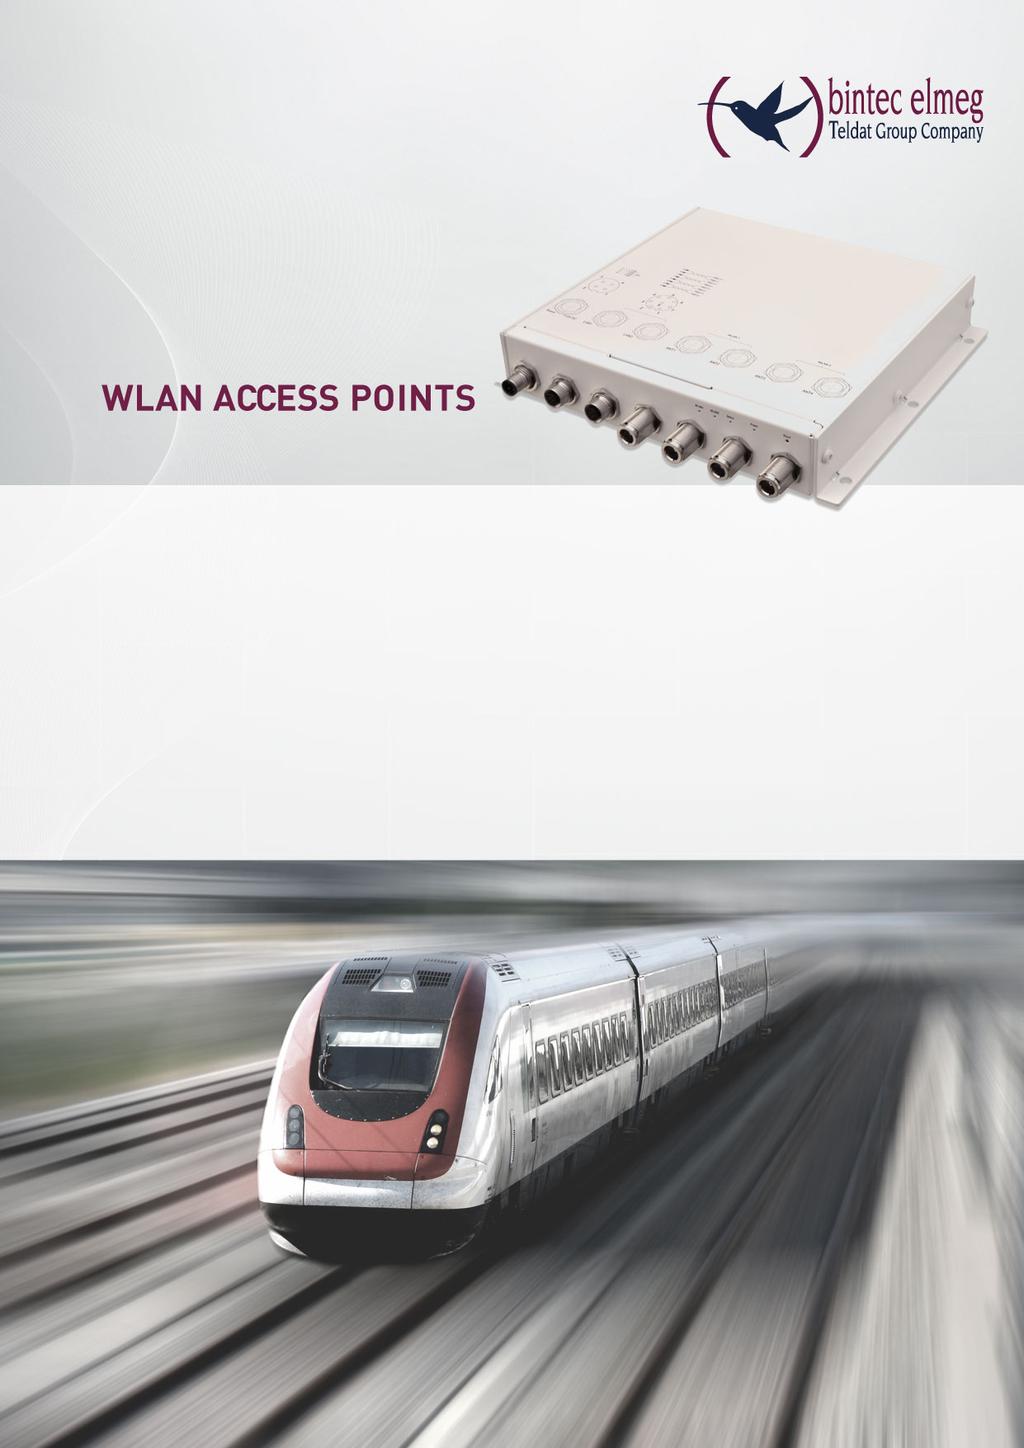 WLAN Access Point for applications in rolling stocks WLAN access for passengers and staff Secure wireless wagon-to-wagon communication